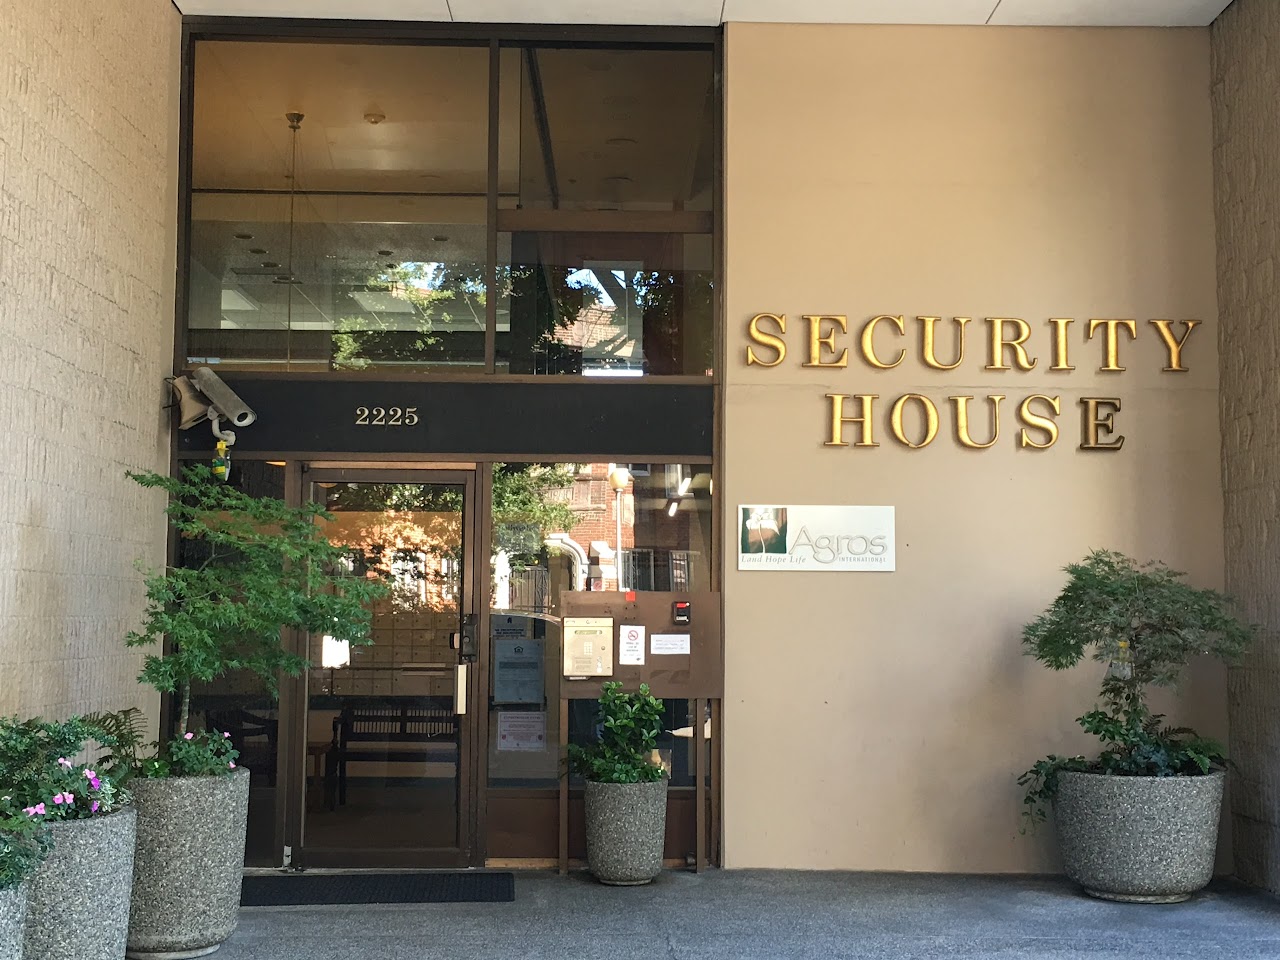 Photo of SECURITY HOUSE. Affordable housing located at 2225 FOURTH AVE SEATTLE, WA 98121